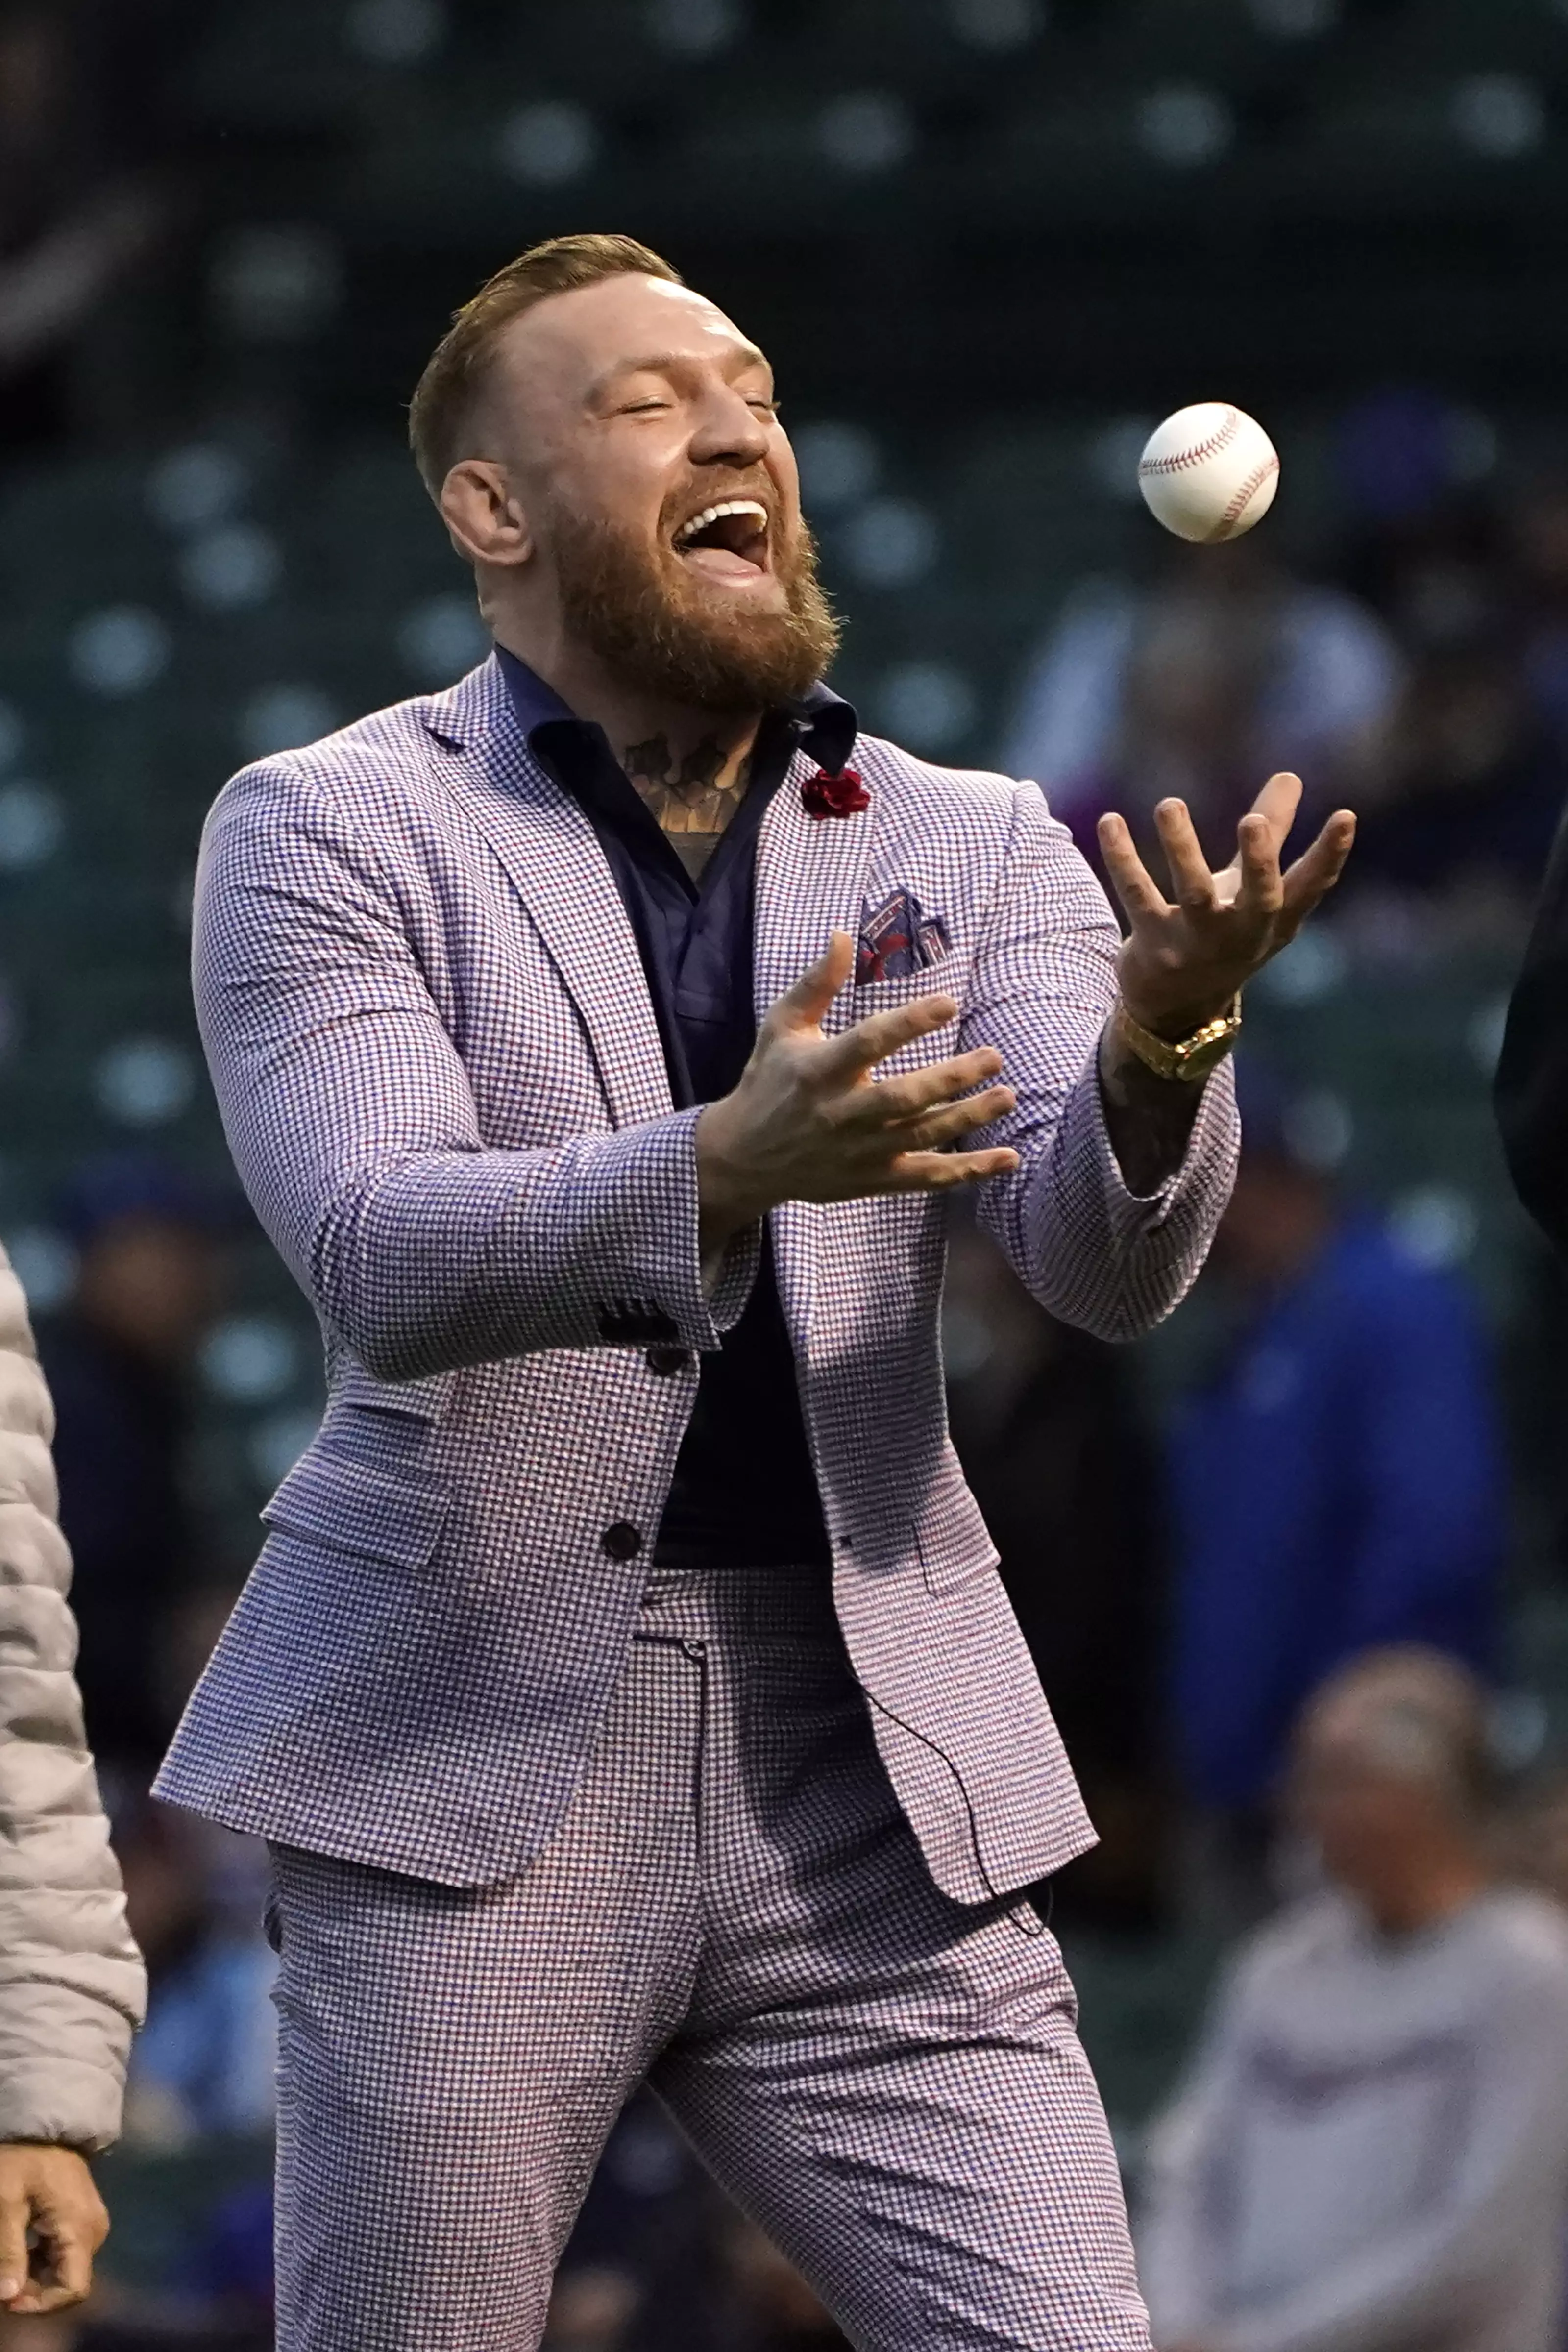 McGregor is adamant his pitch was actually pretty good.